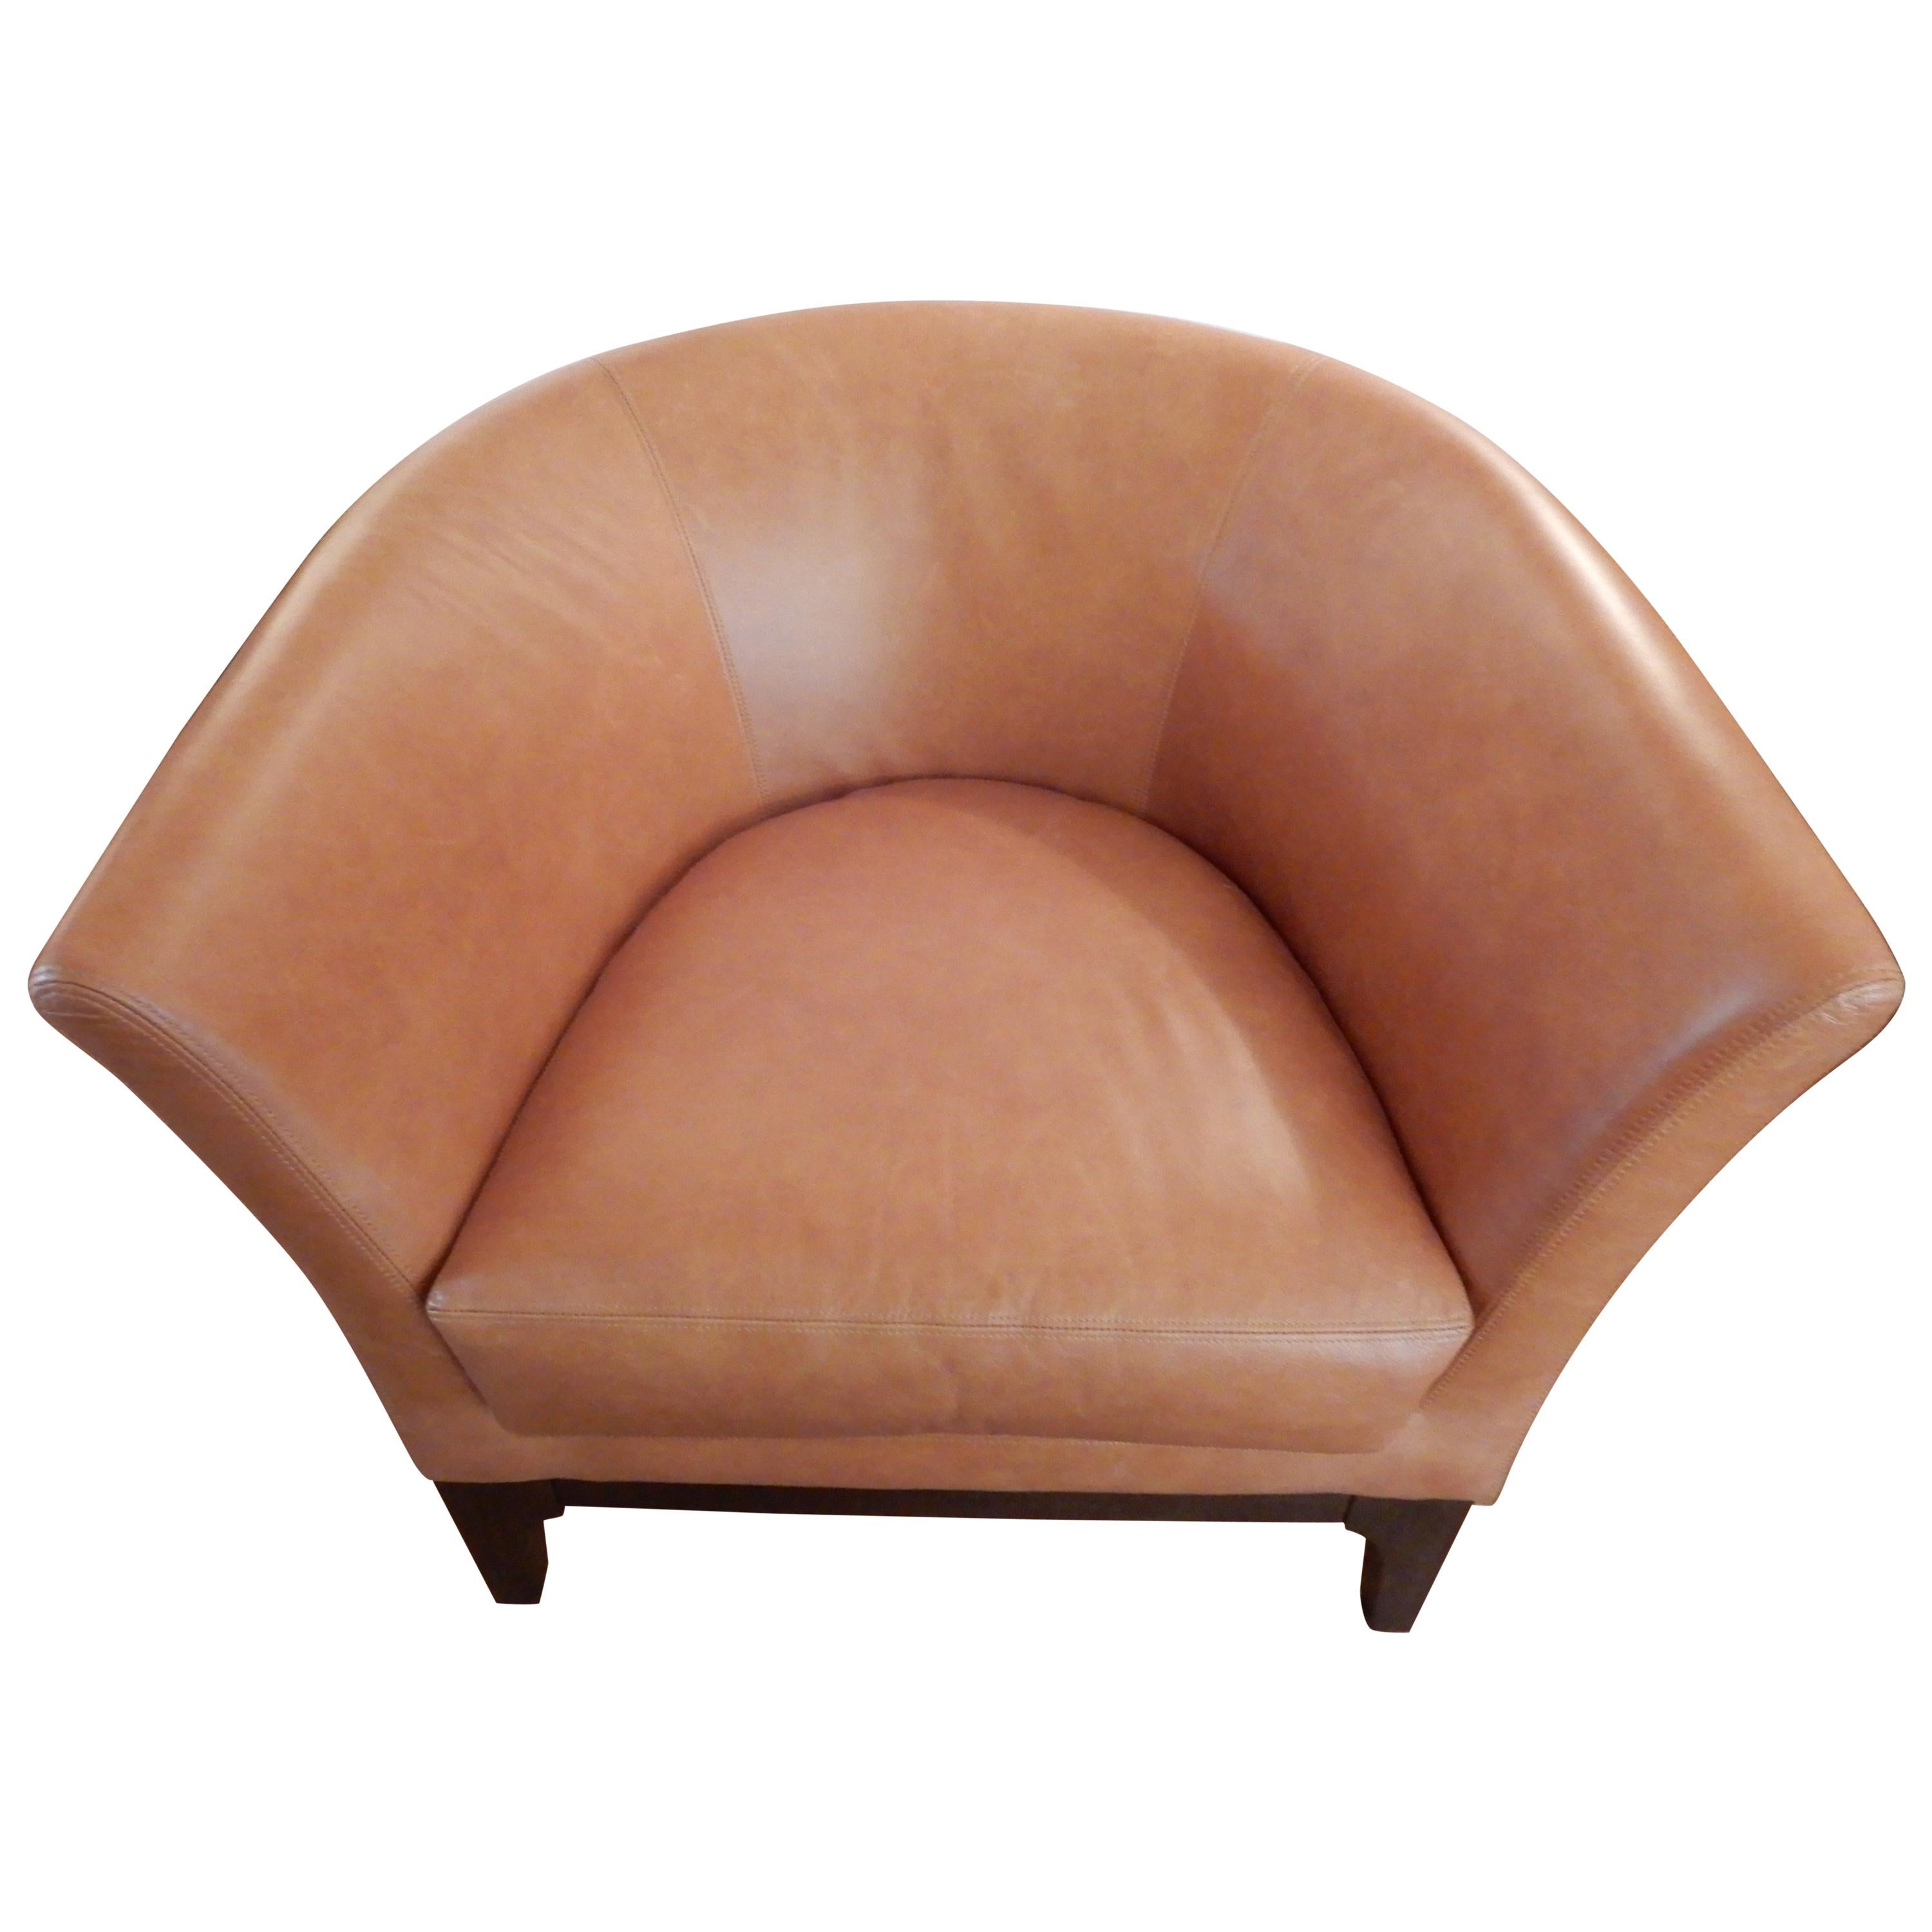 Pair of  Modern Italian Leather Club or Armchairs